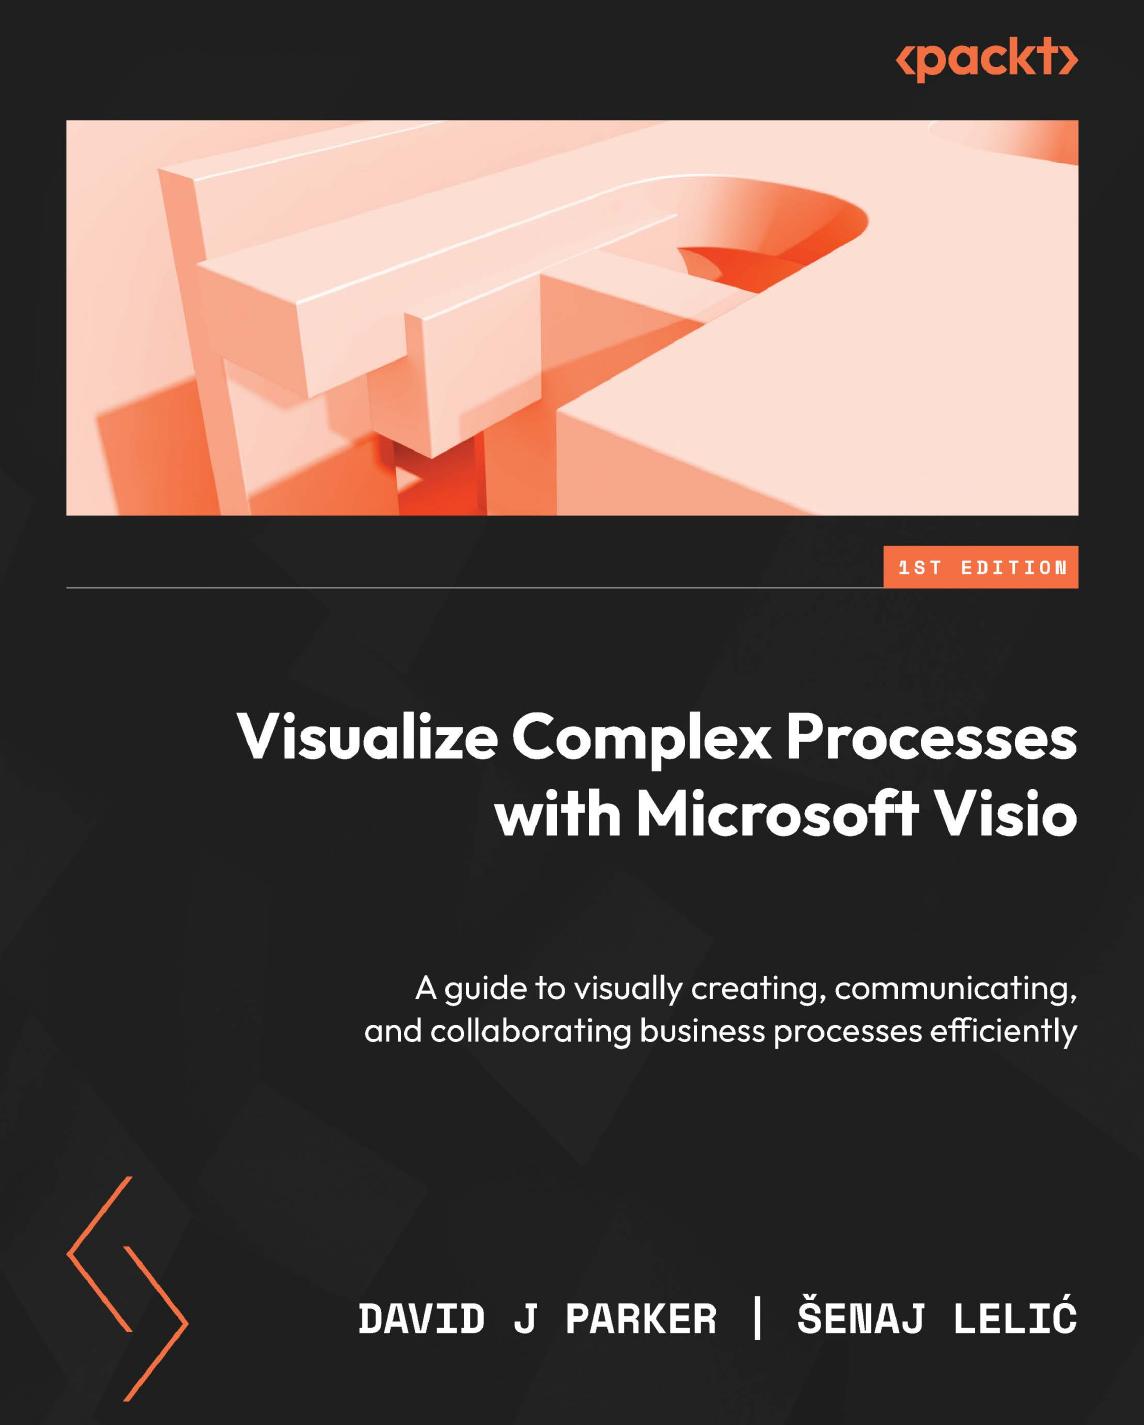 Visualize Complex Processes with Microsoft Visio: A guide to visually creating, communicating, and collaborating business processes efficiently by David J Parker Senaj Lelic